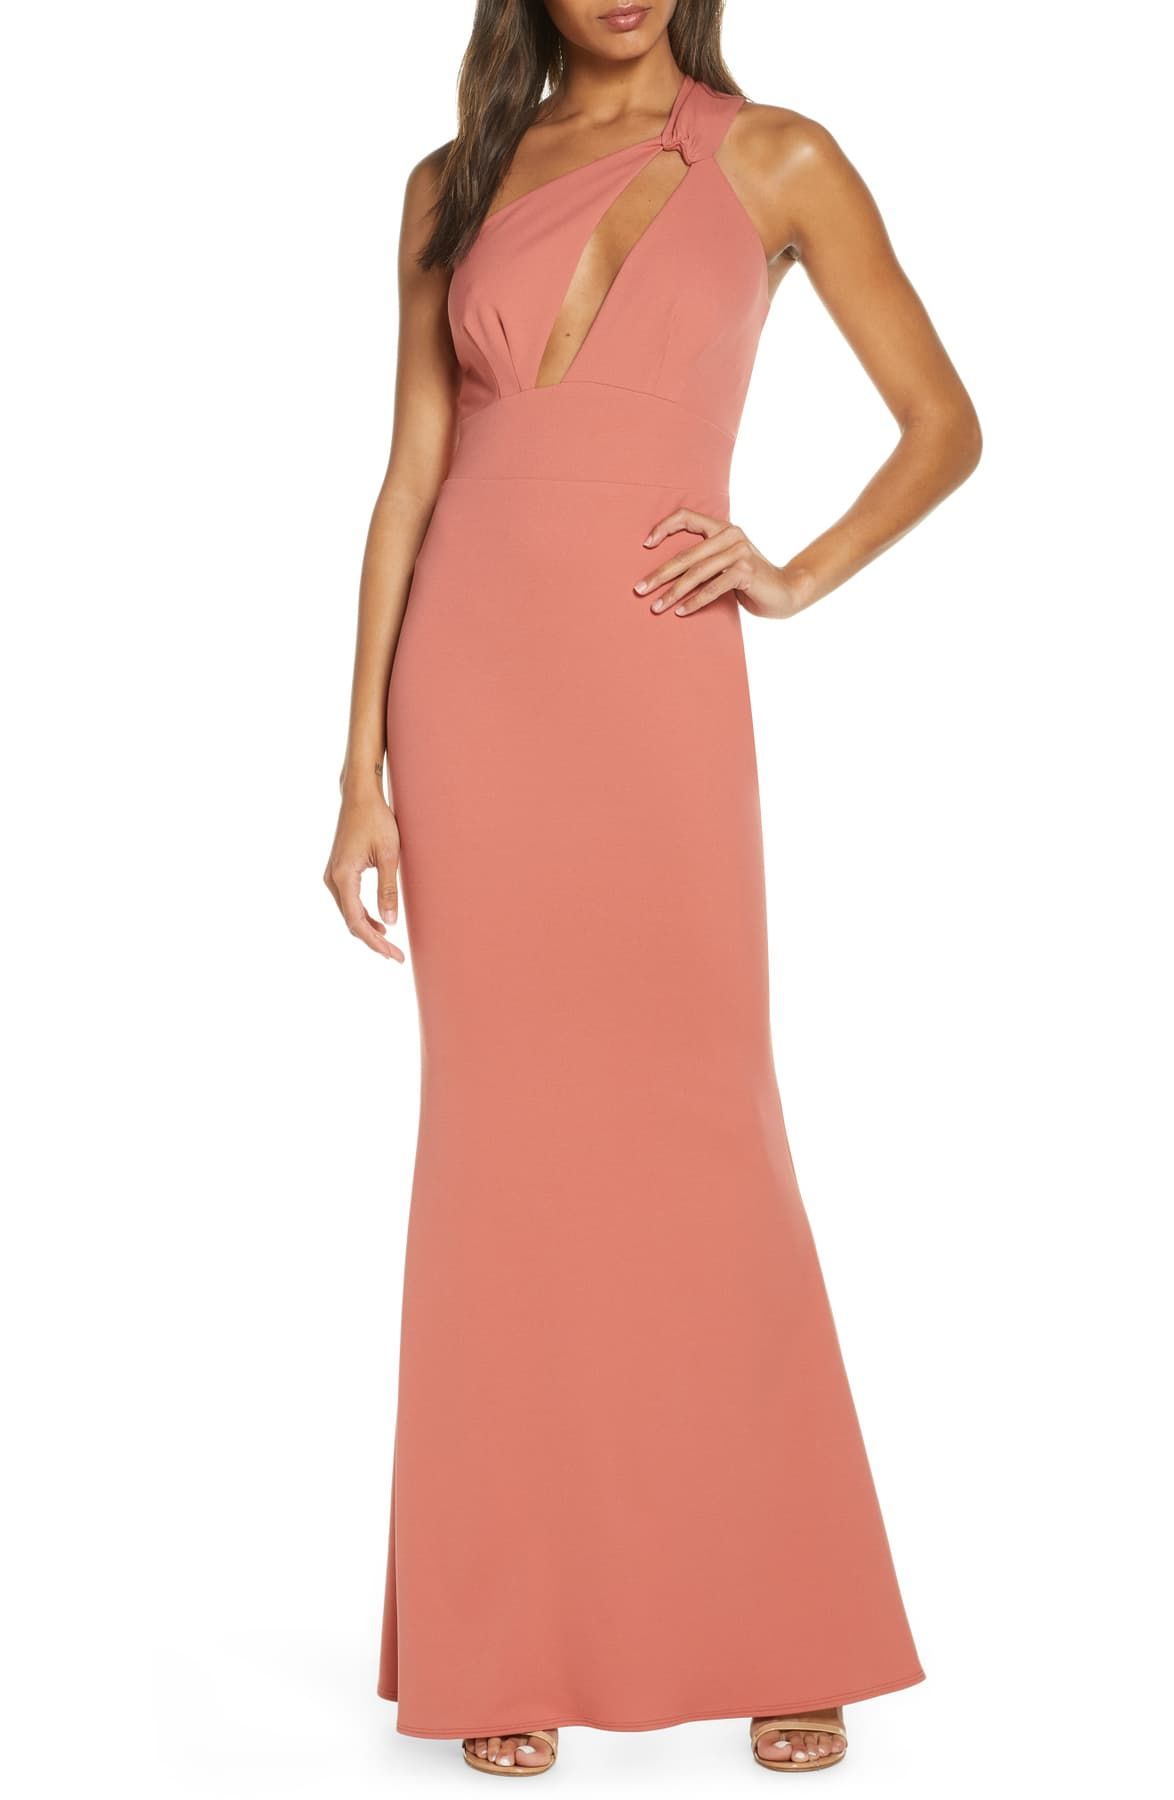 Edgy One-Shoulder Sleeveless Gown KATIE MAY